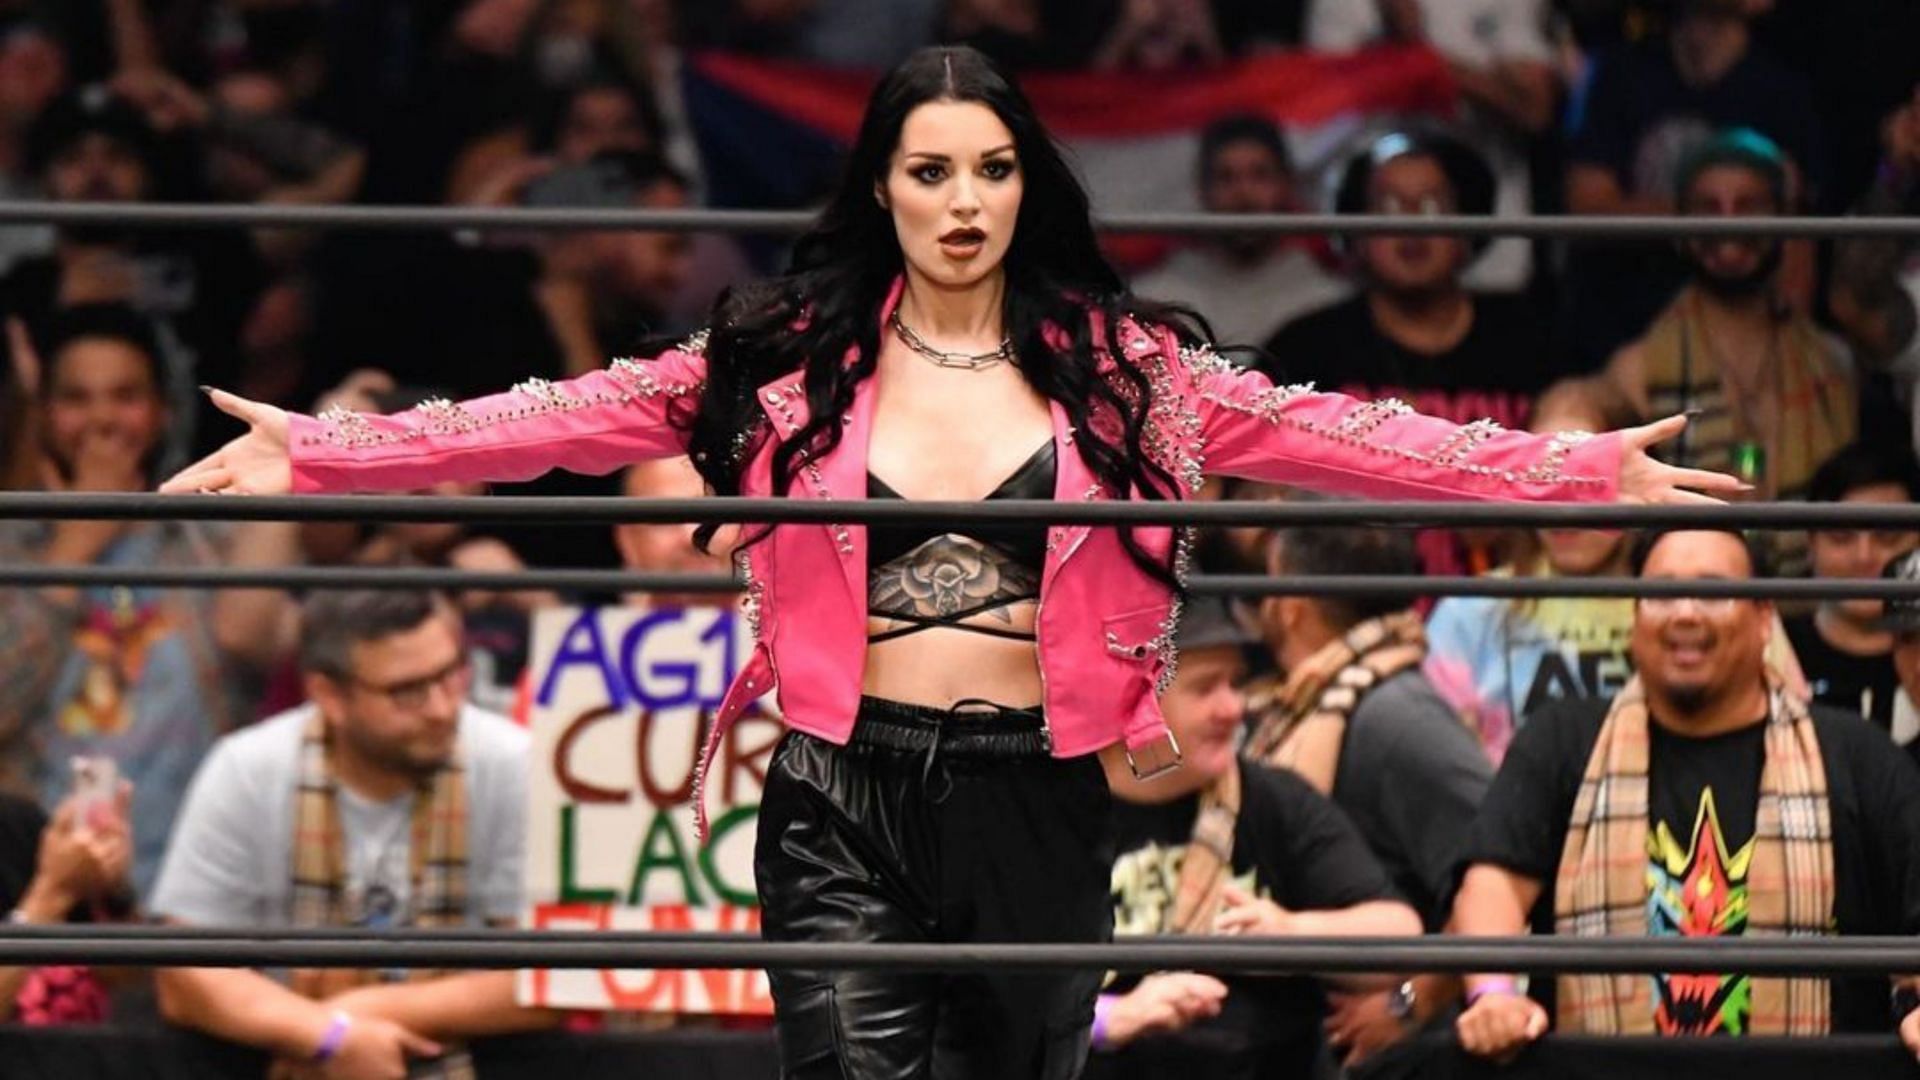 Who are the female wrestlers in aew dating?